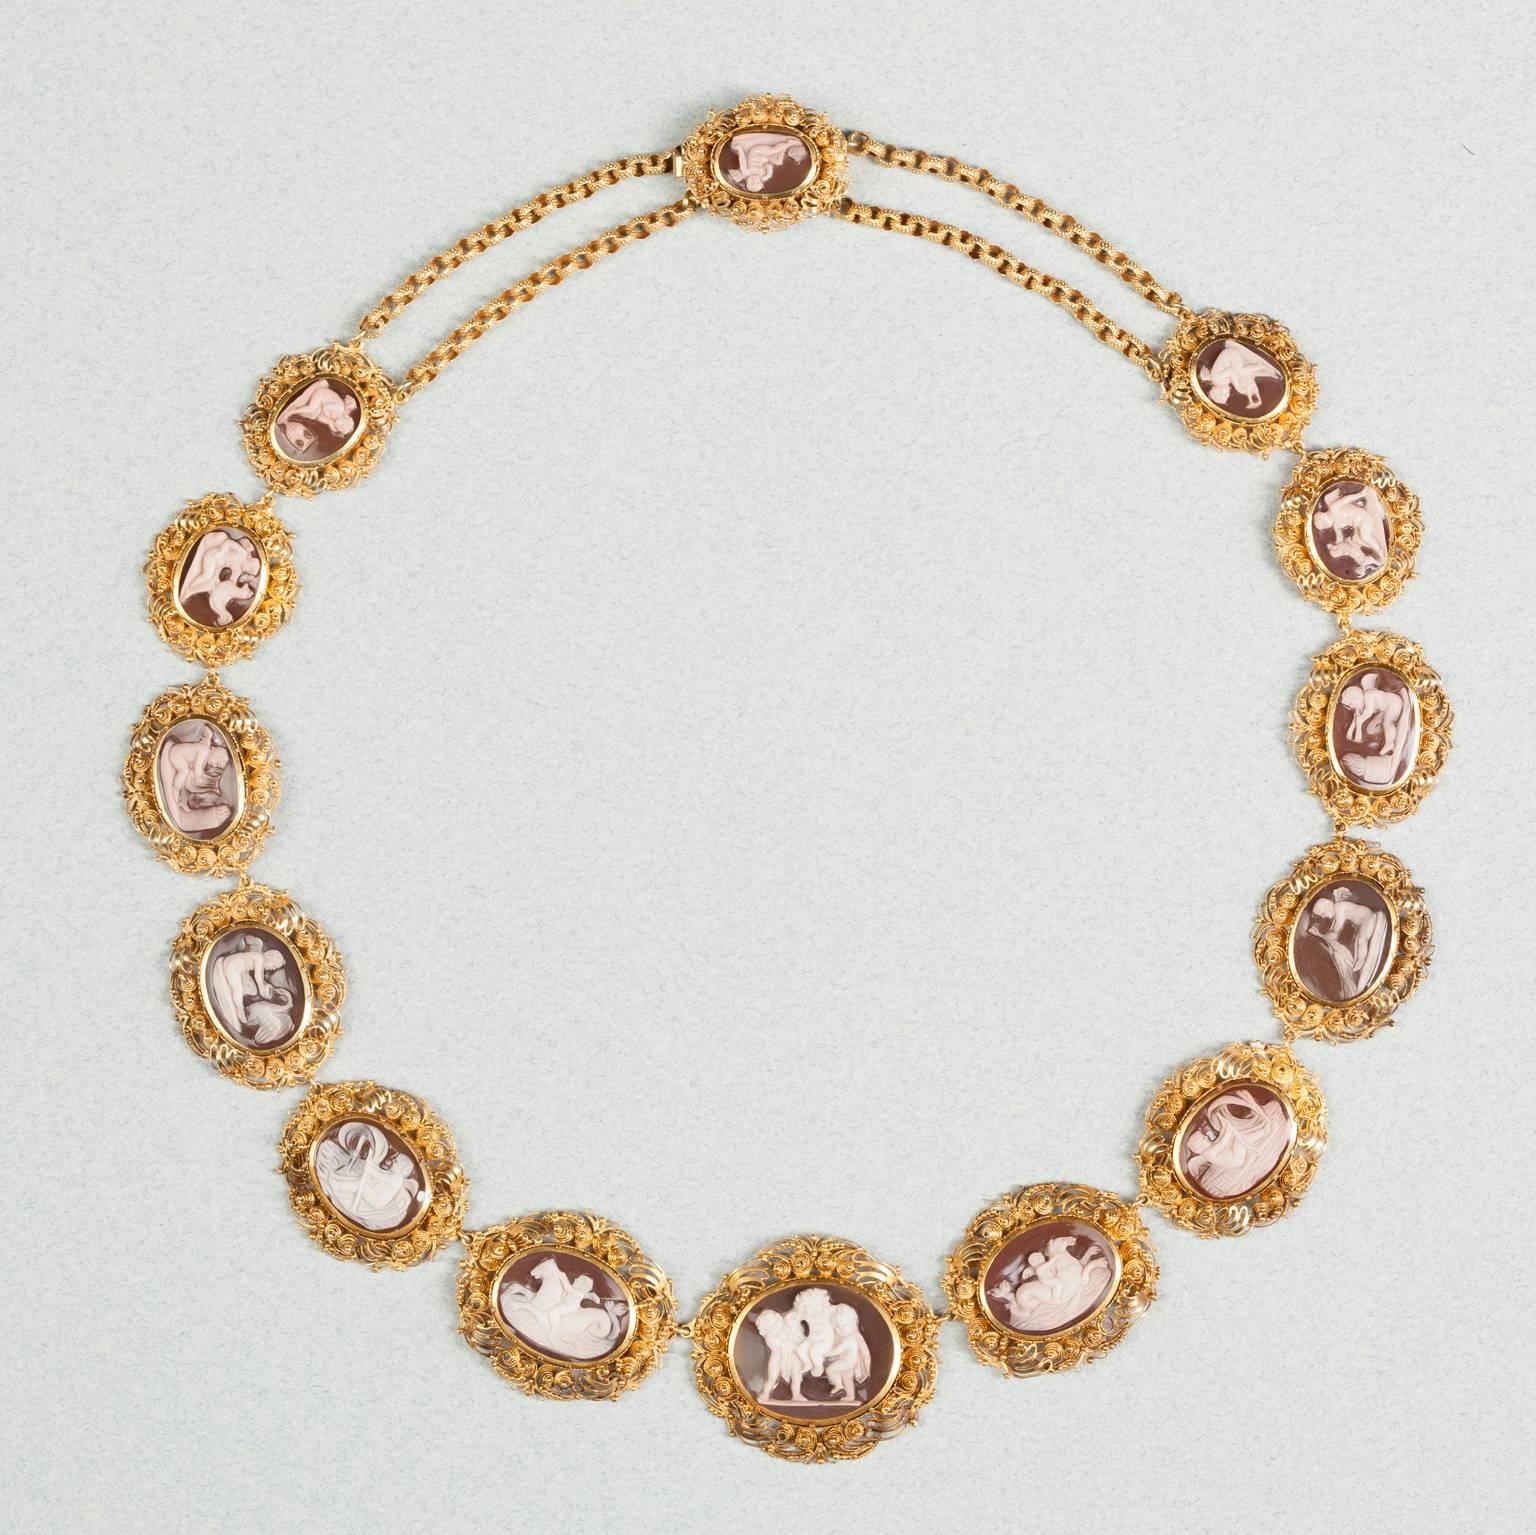 A 15-carat gold necklace set with 14 sardonyx cameos with genre scenes of Amor, the god of love, set in a rich Georgian mount with fine spirals (cannetille) and granules (grainti), a double textured chain links the last cameos to the clasp,